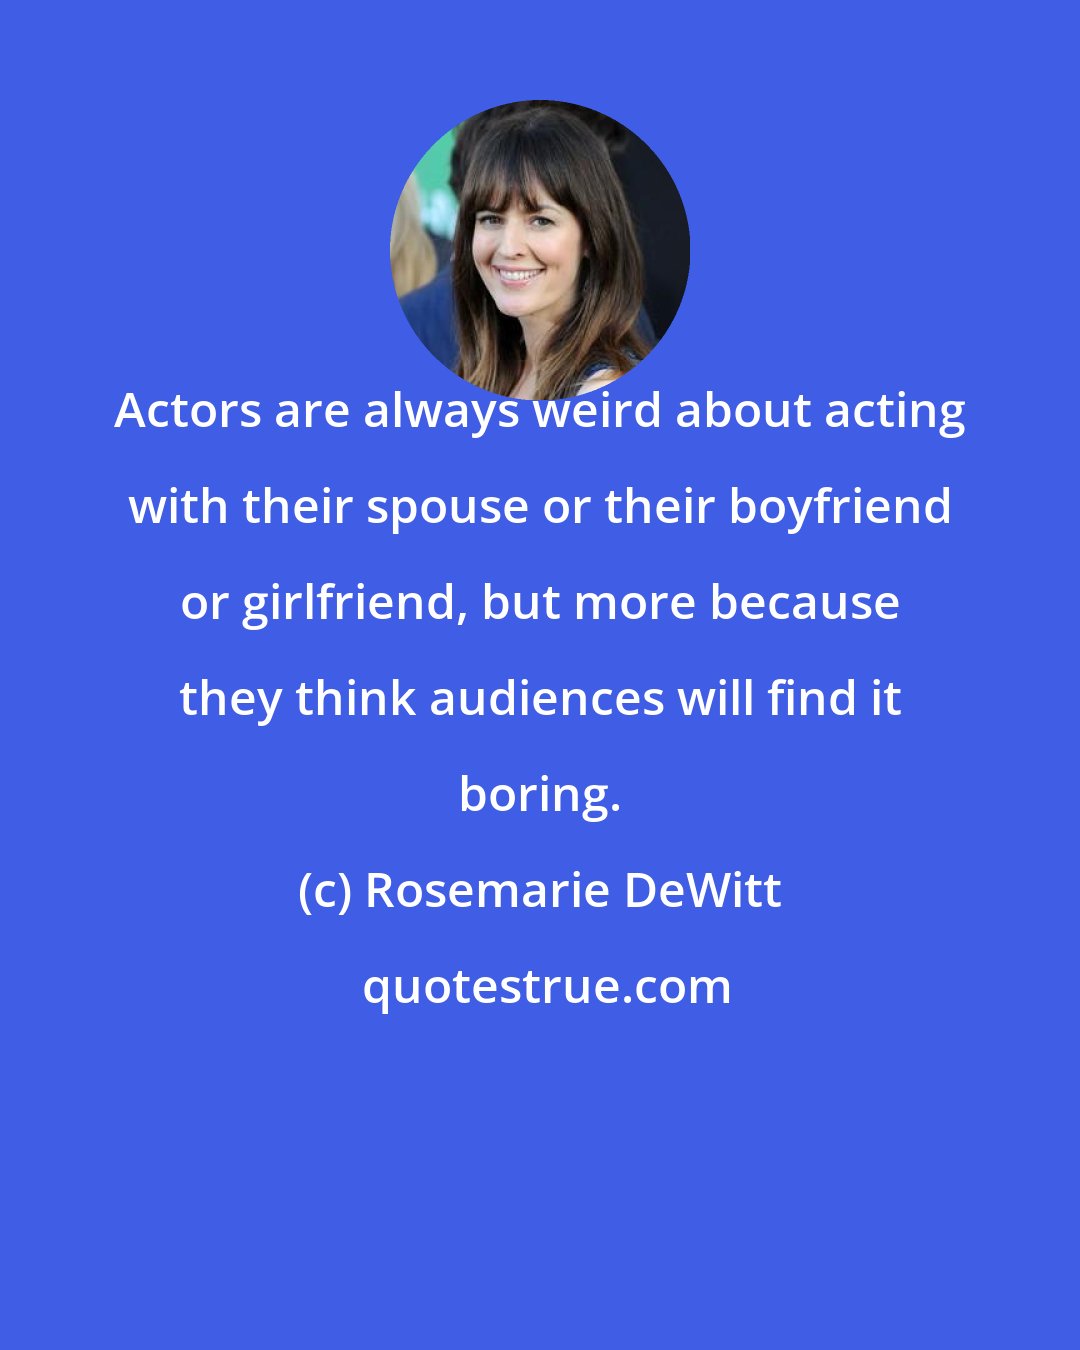 Rosemarie DeWitt: Actors are always weird about acting with their spouse or their boyfriend or girlfriend, but more because they think audiences will find it boring.